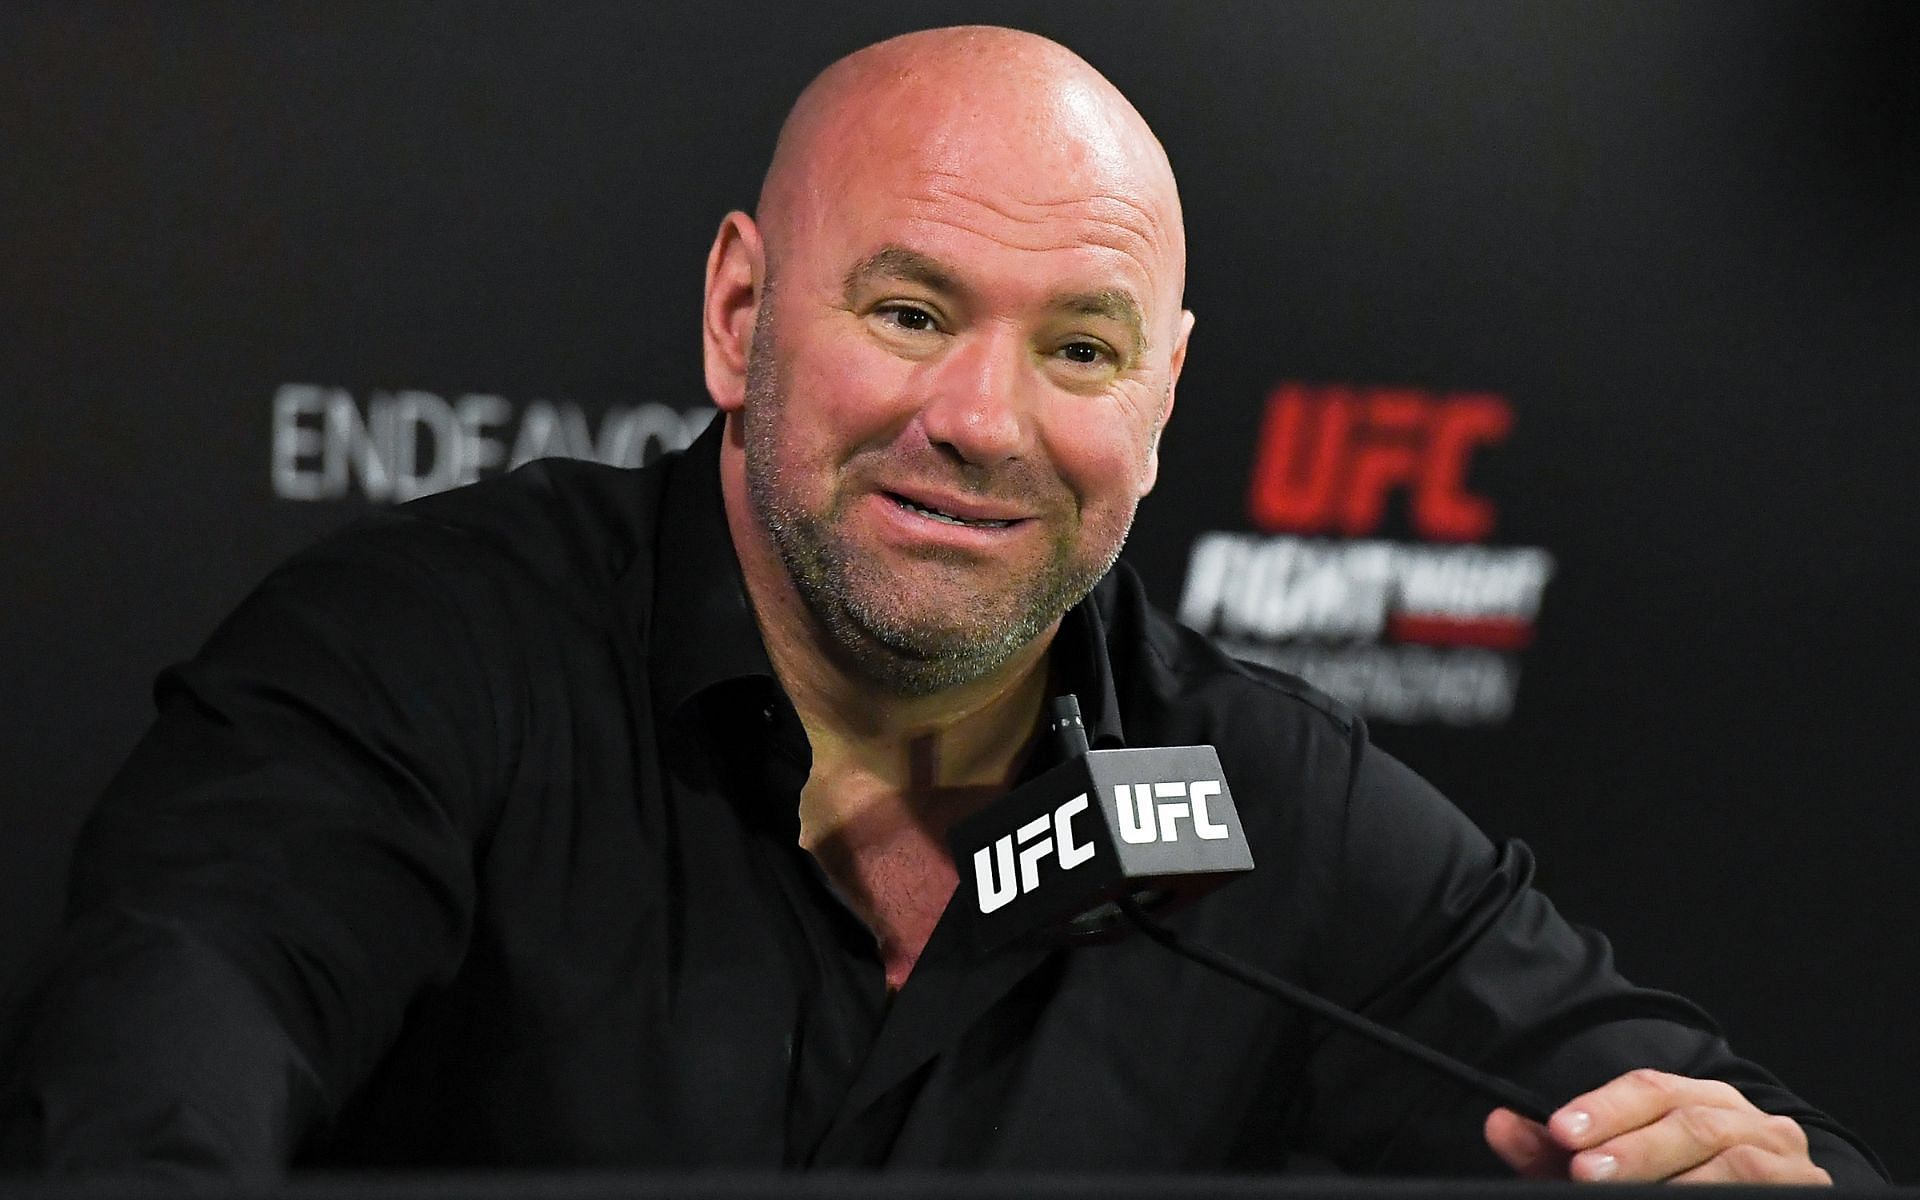 Dana White is a world-renowned MMA promoter for the UFC